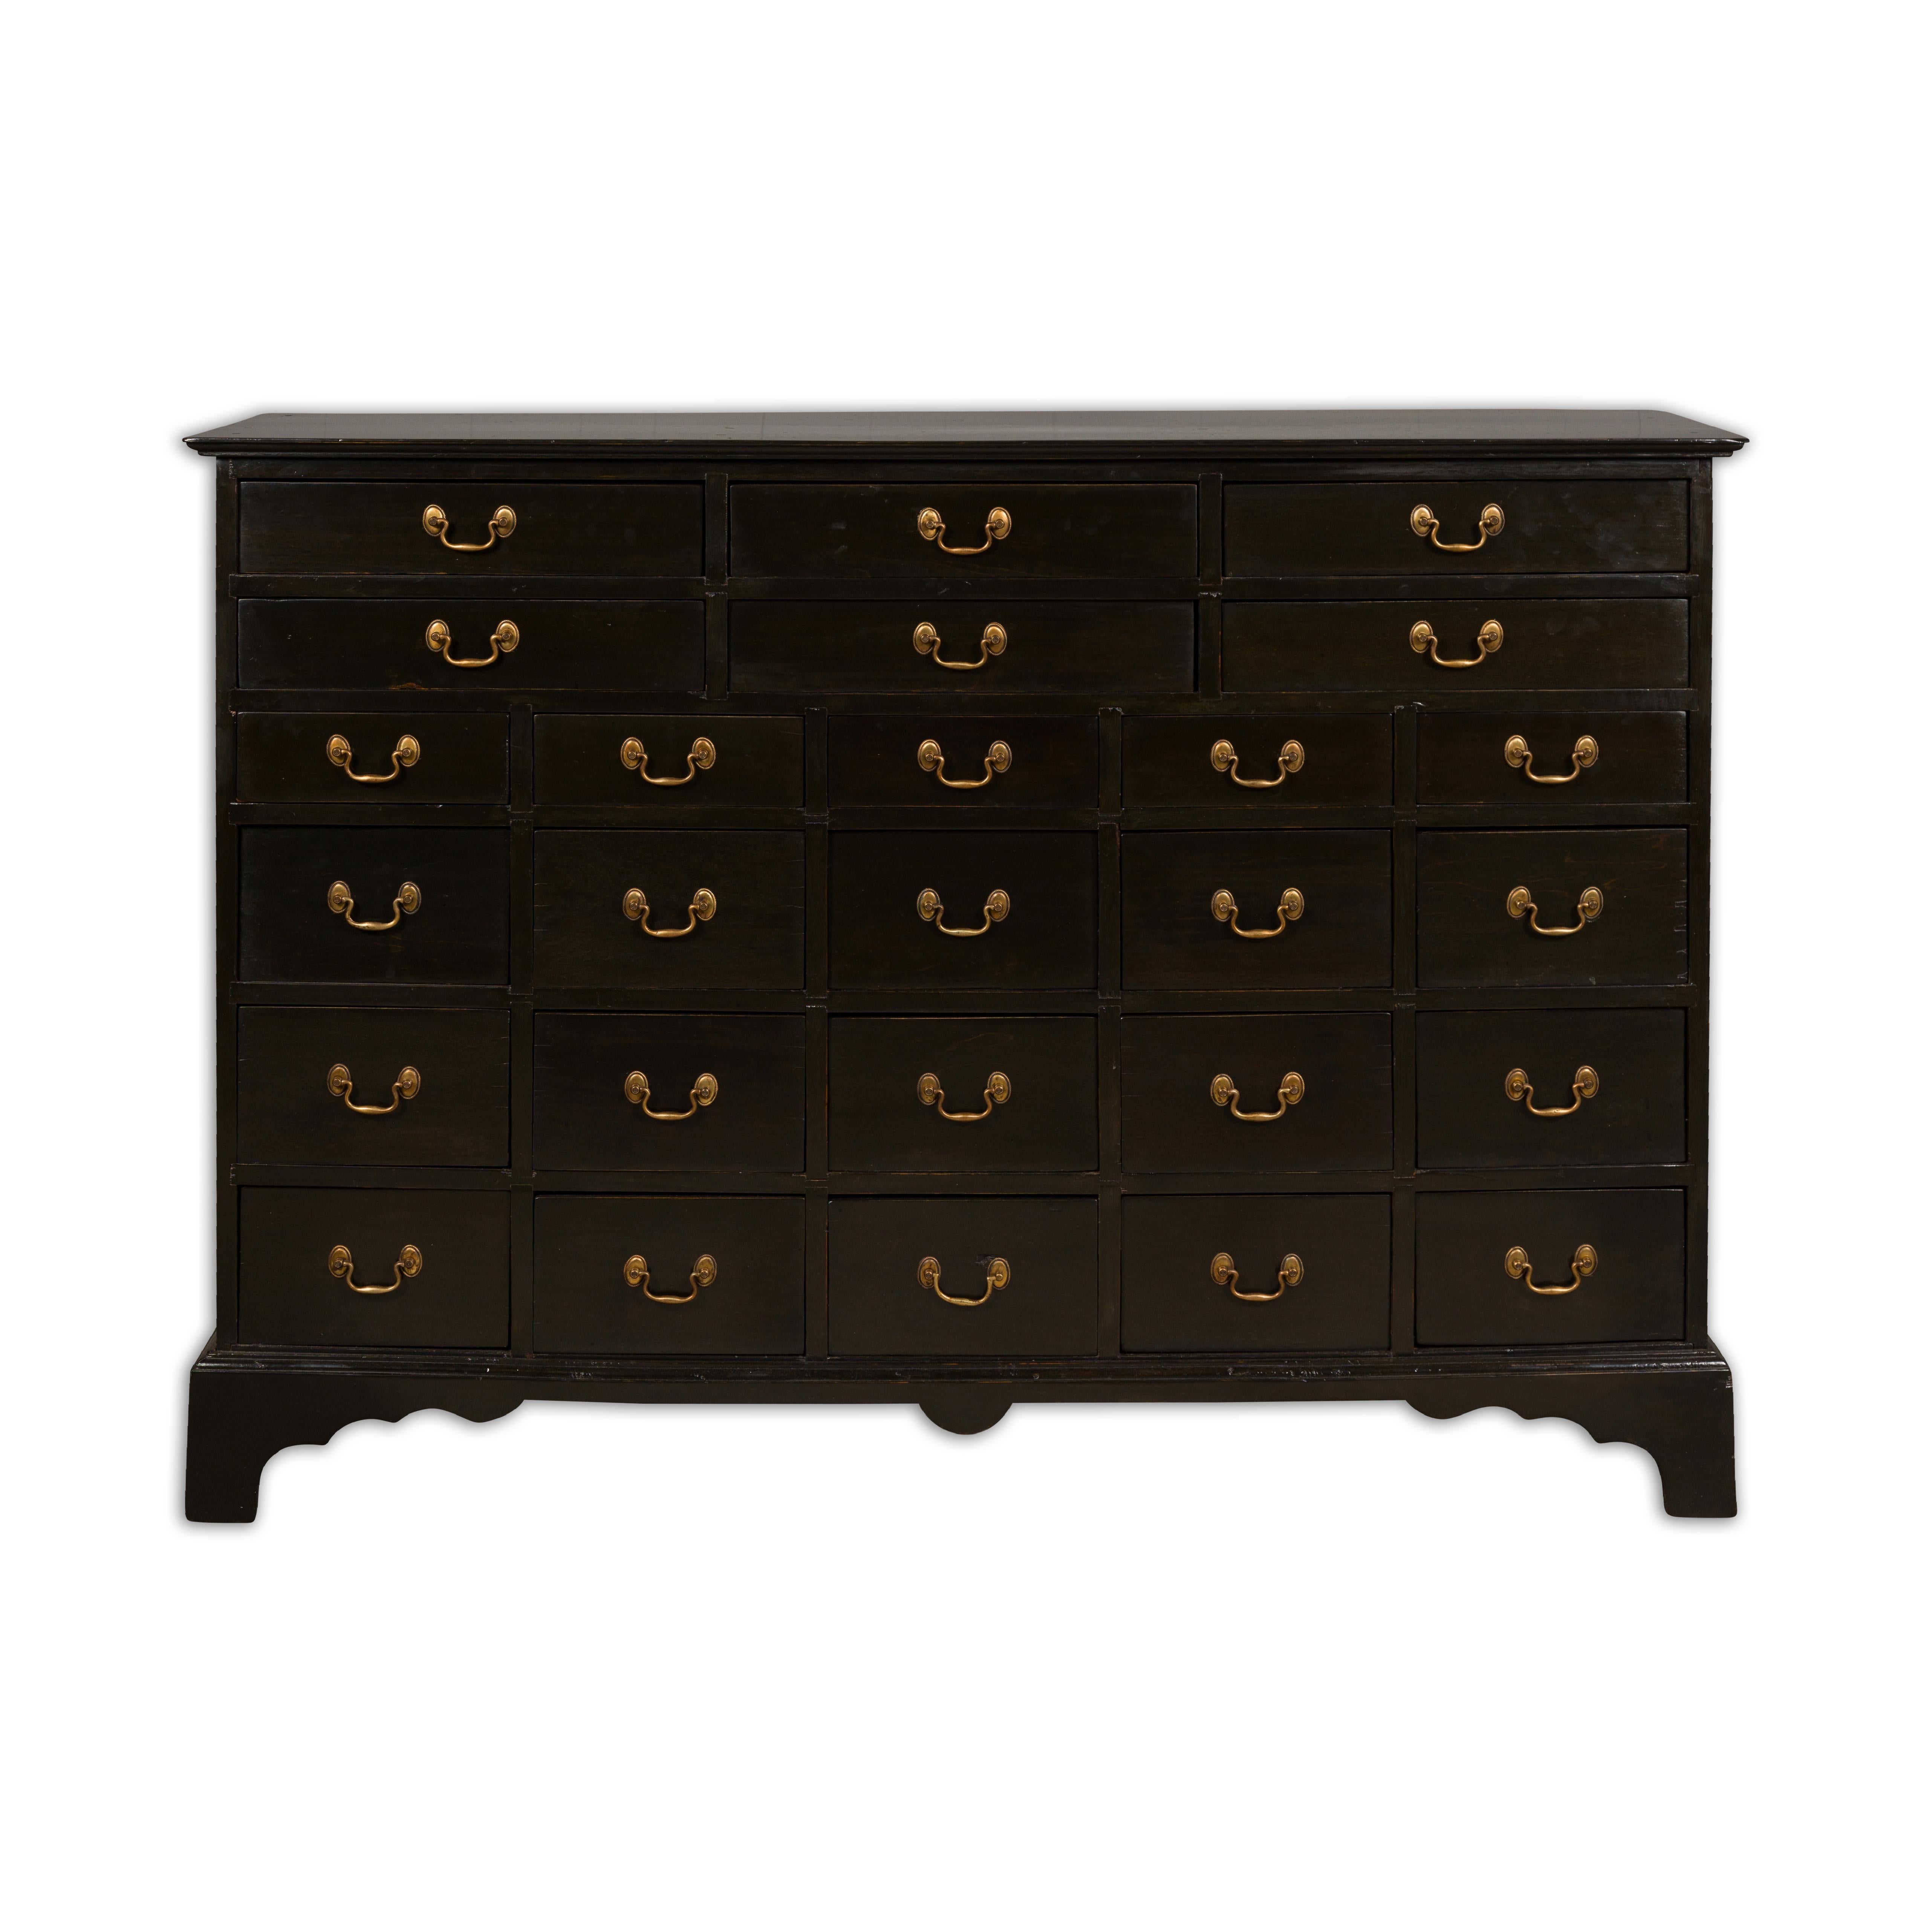 An English black apothecary chest from the 19th century with 26 drawers, brass hardware and carved bracket feet. Behold the grandeur of the 19th century with this English black apothecary chest, a piece rich in history and character. The chest,